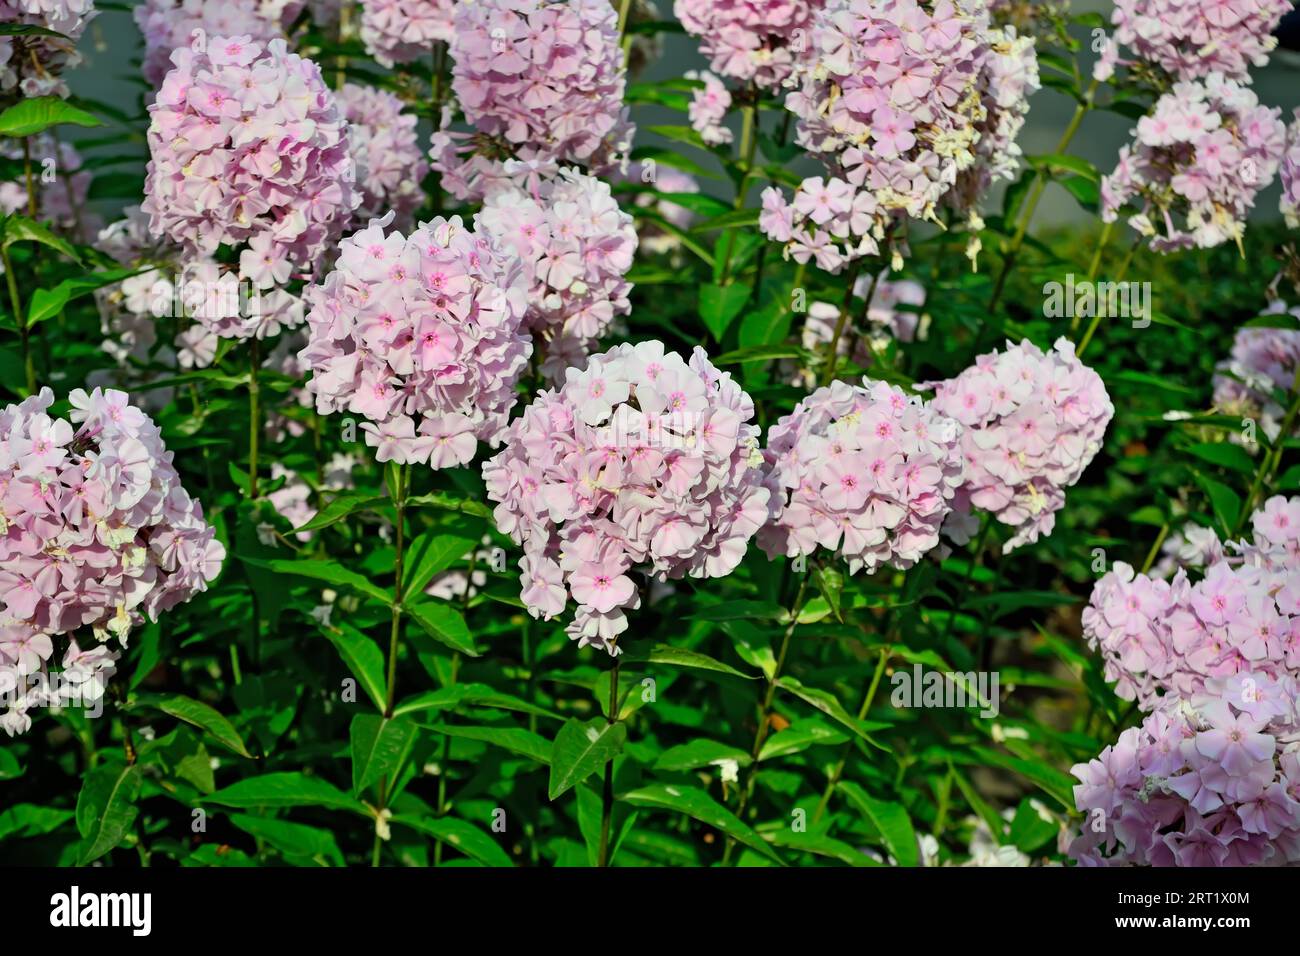 Flowerbed of beautiful pink phlox flowers close up in the bright sun Stock Photo